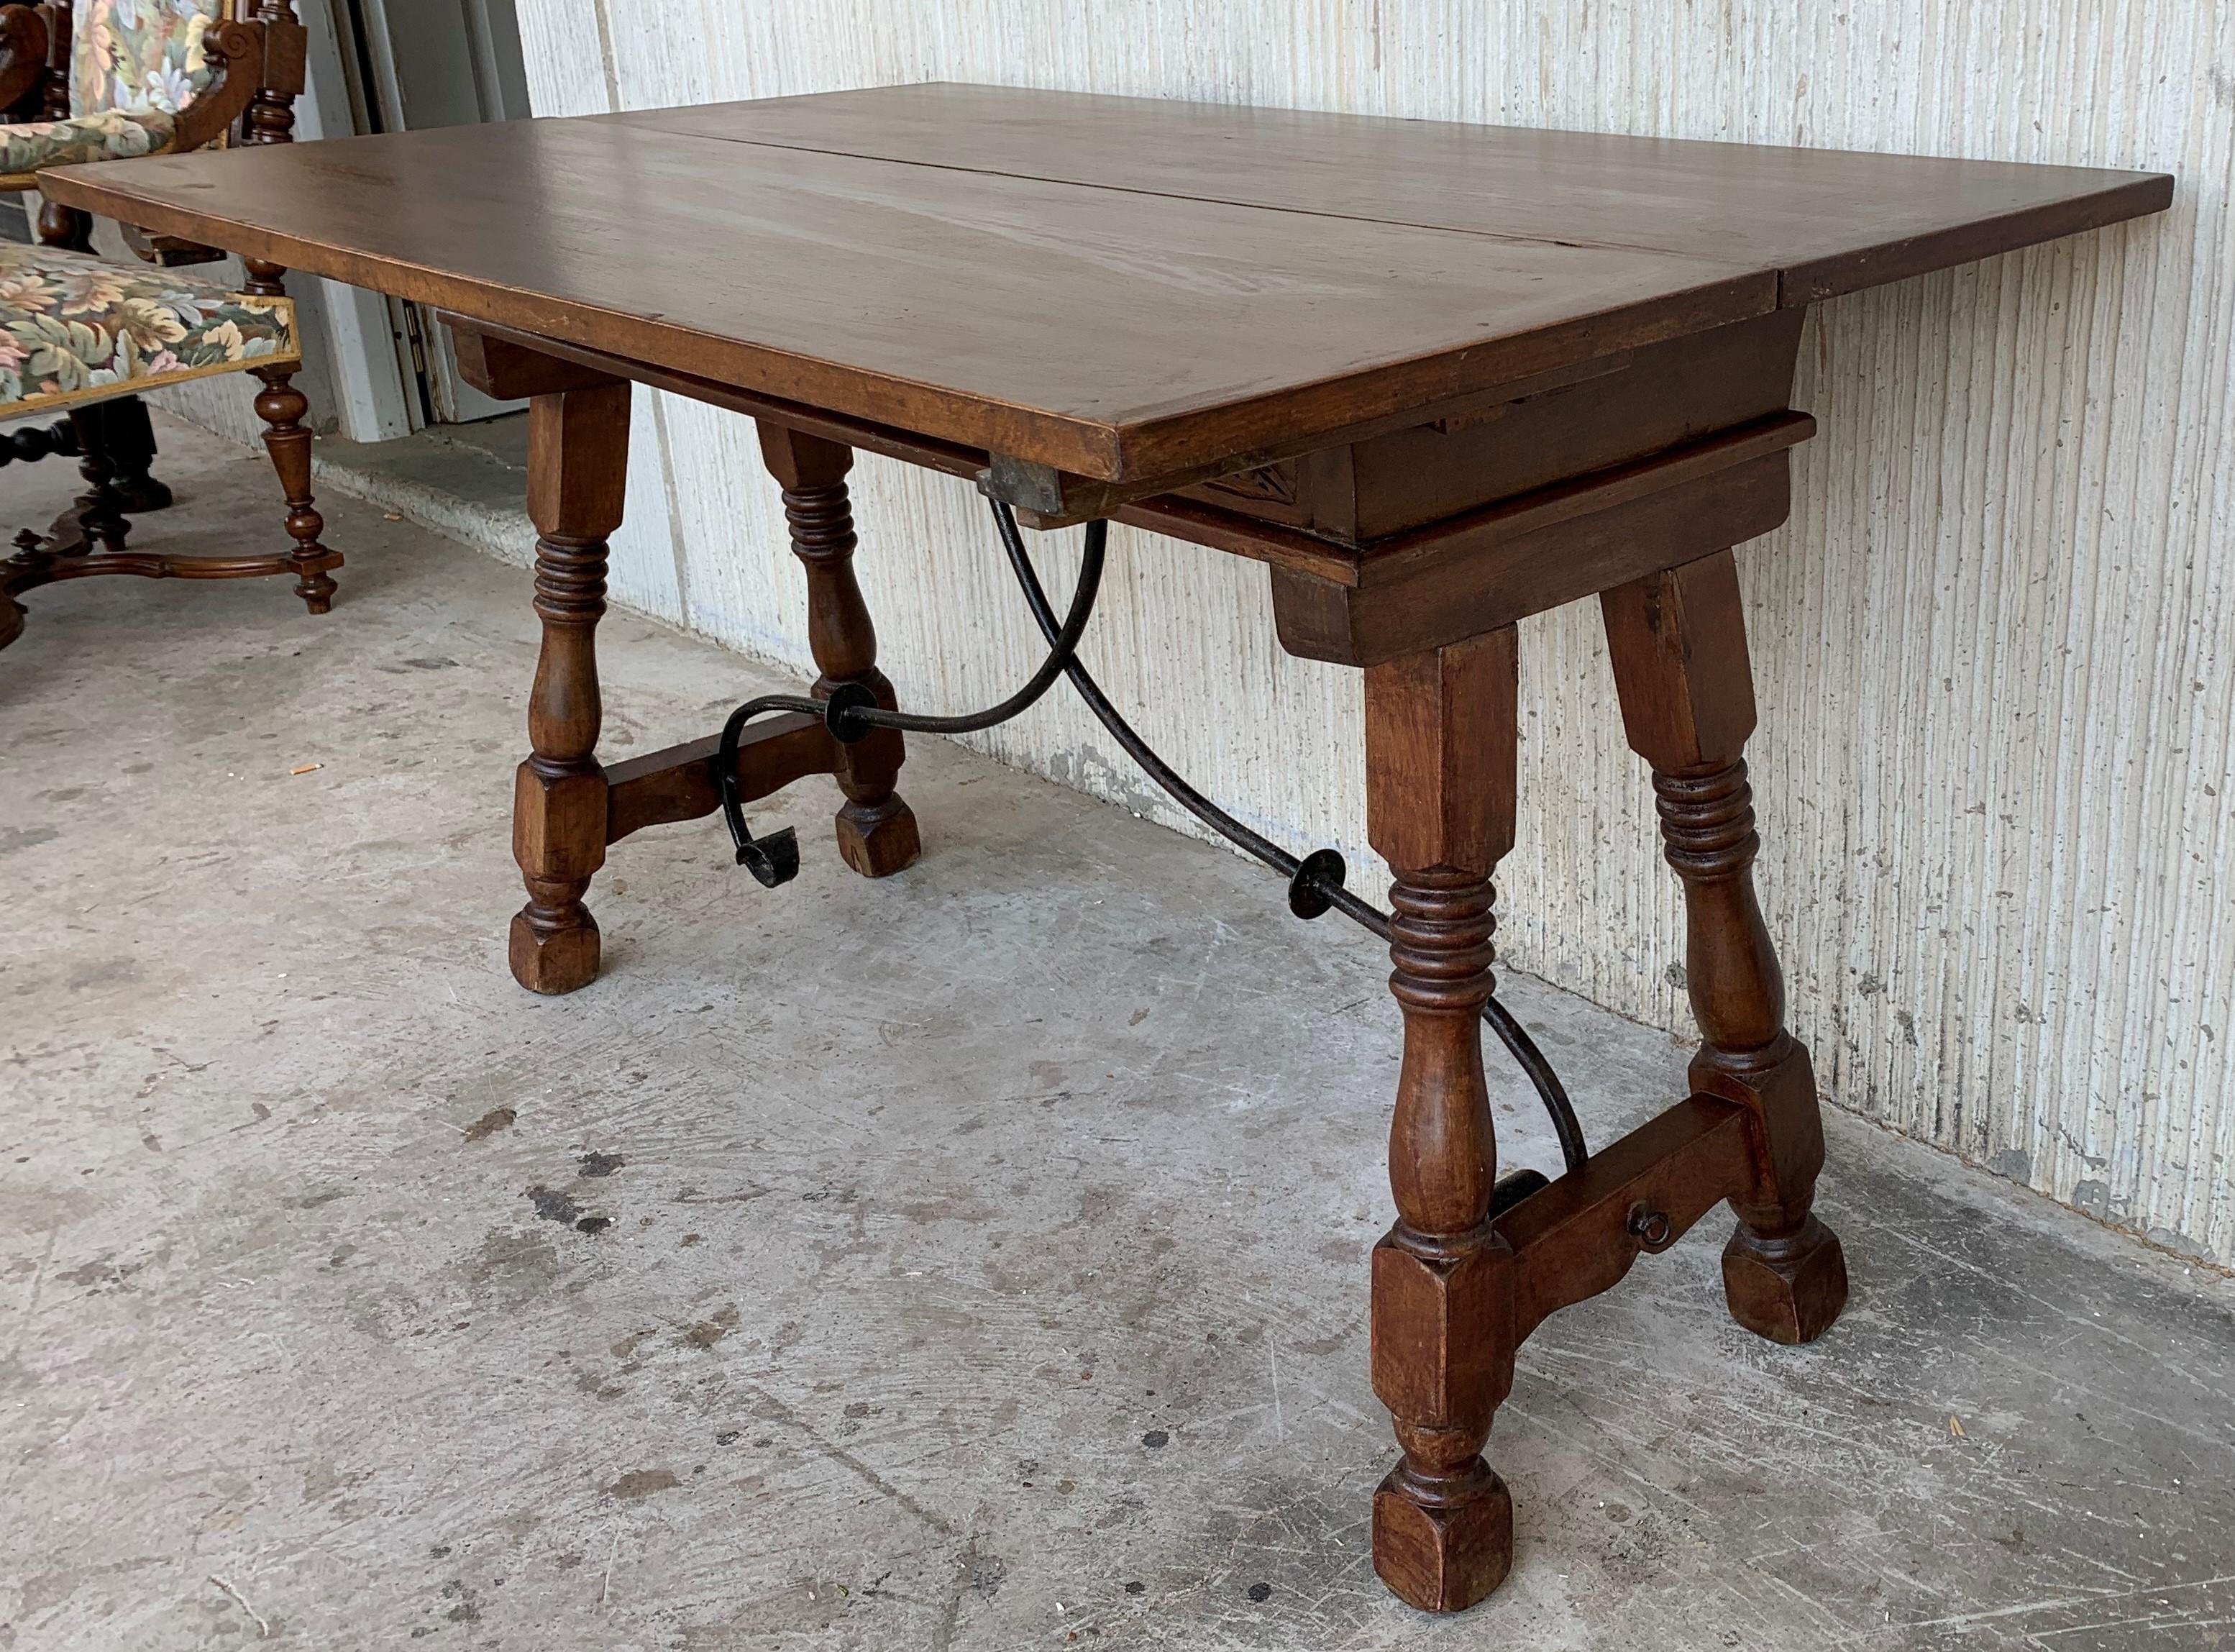 20th Century Spanish Console Fold Out Table with Iron Stretcher and Two Drawers 1